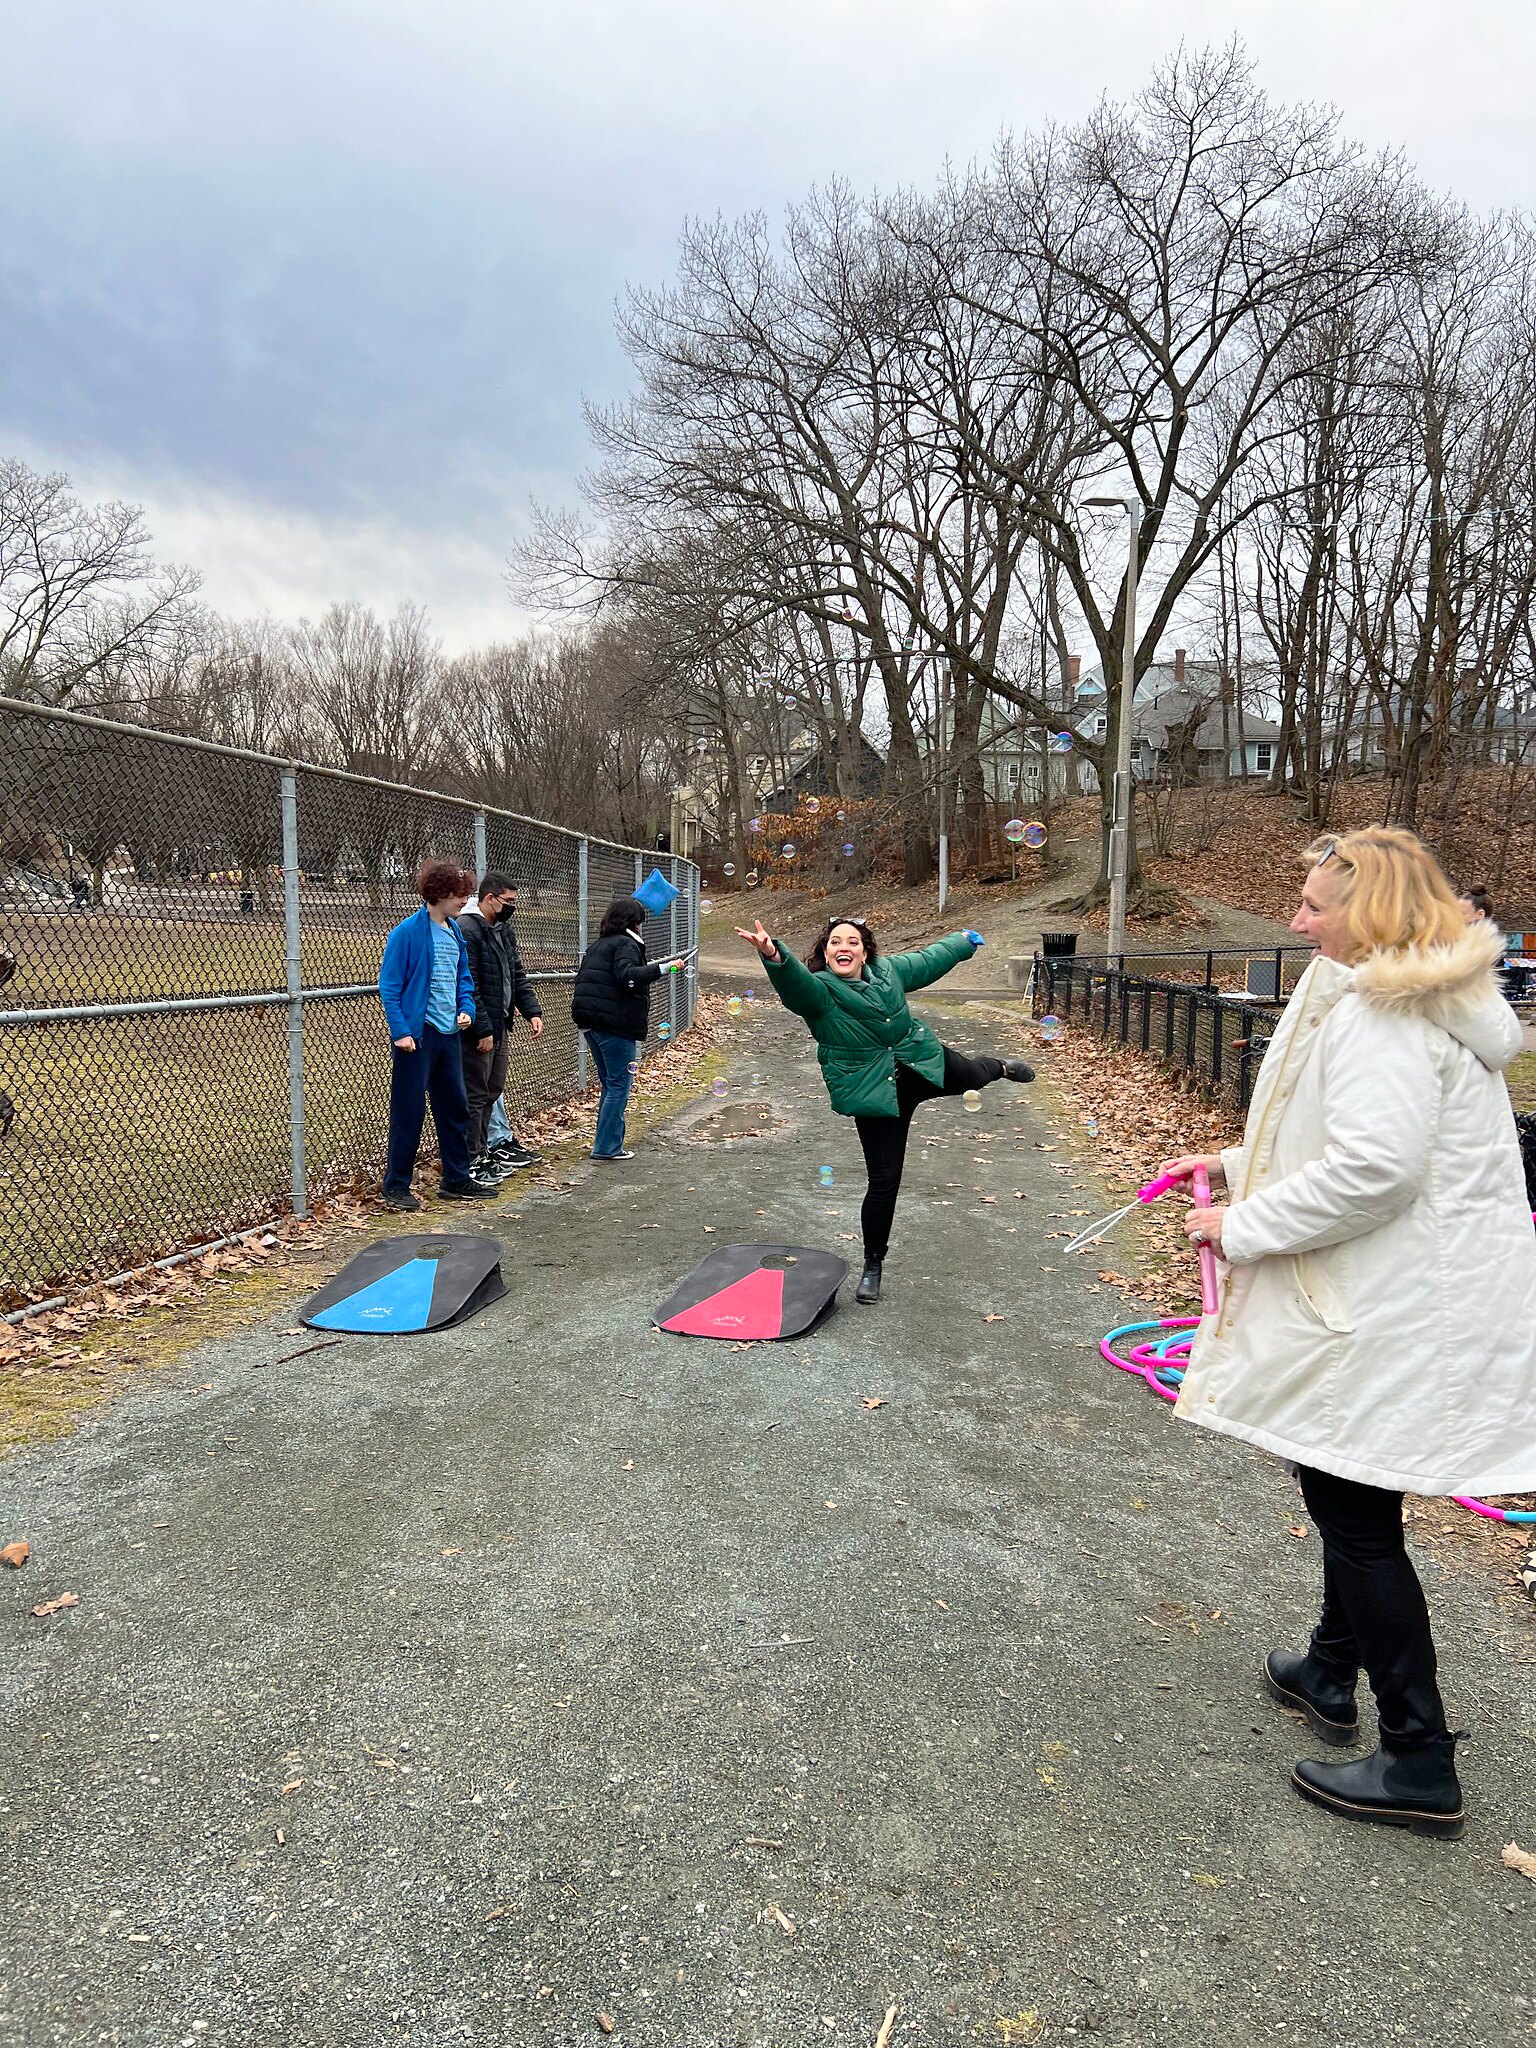 A woman gleefully throws a cornhole bag while a woman and a few teenagers look on